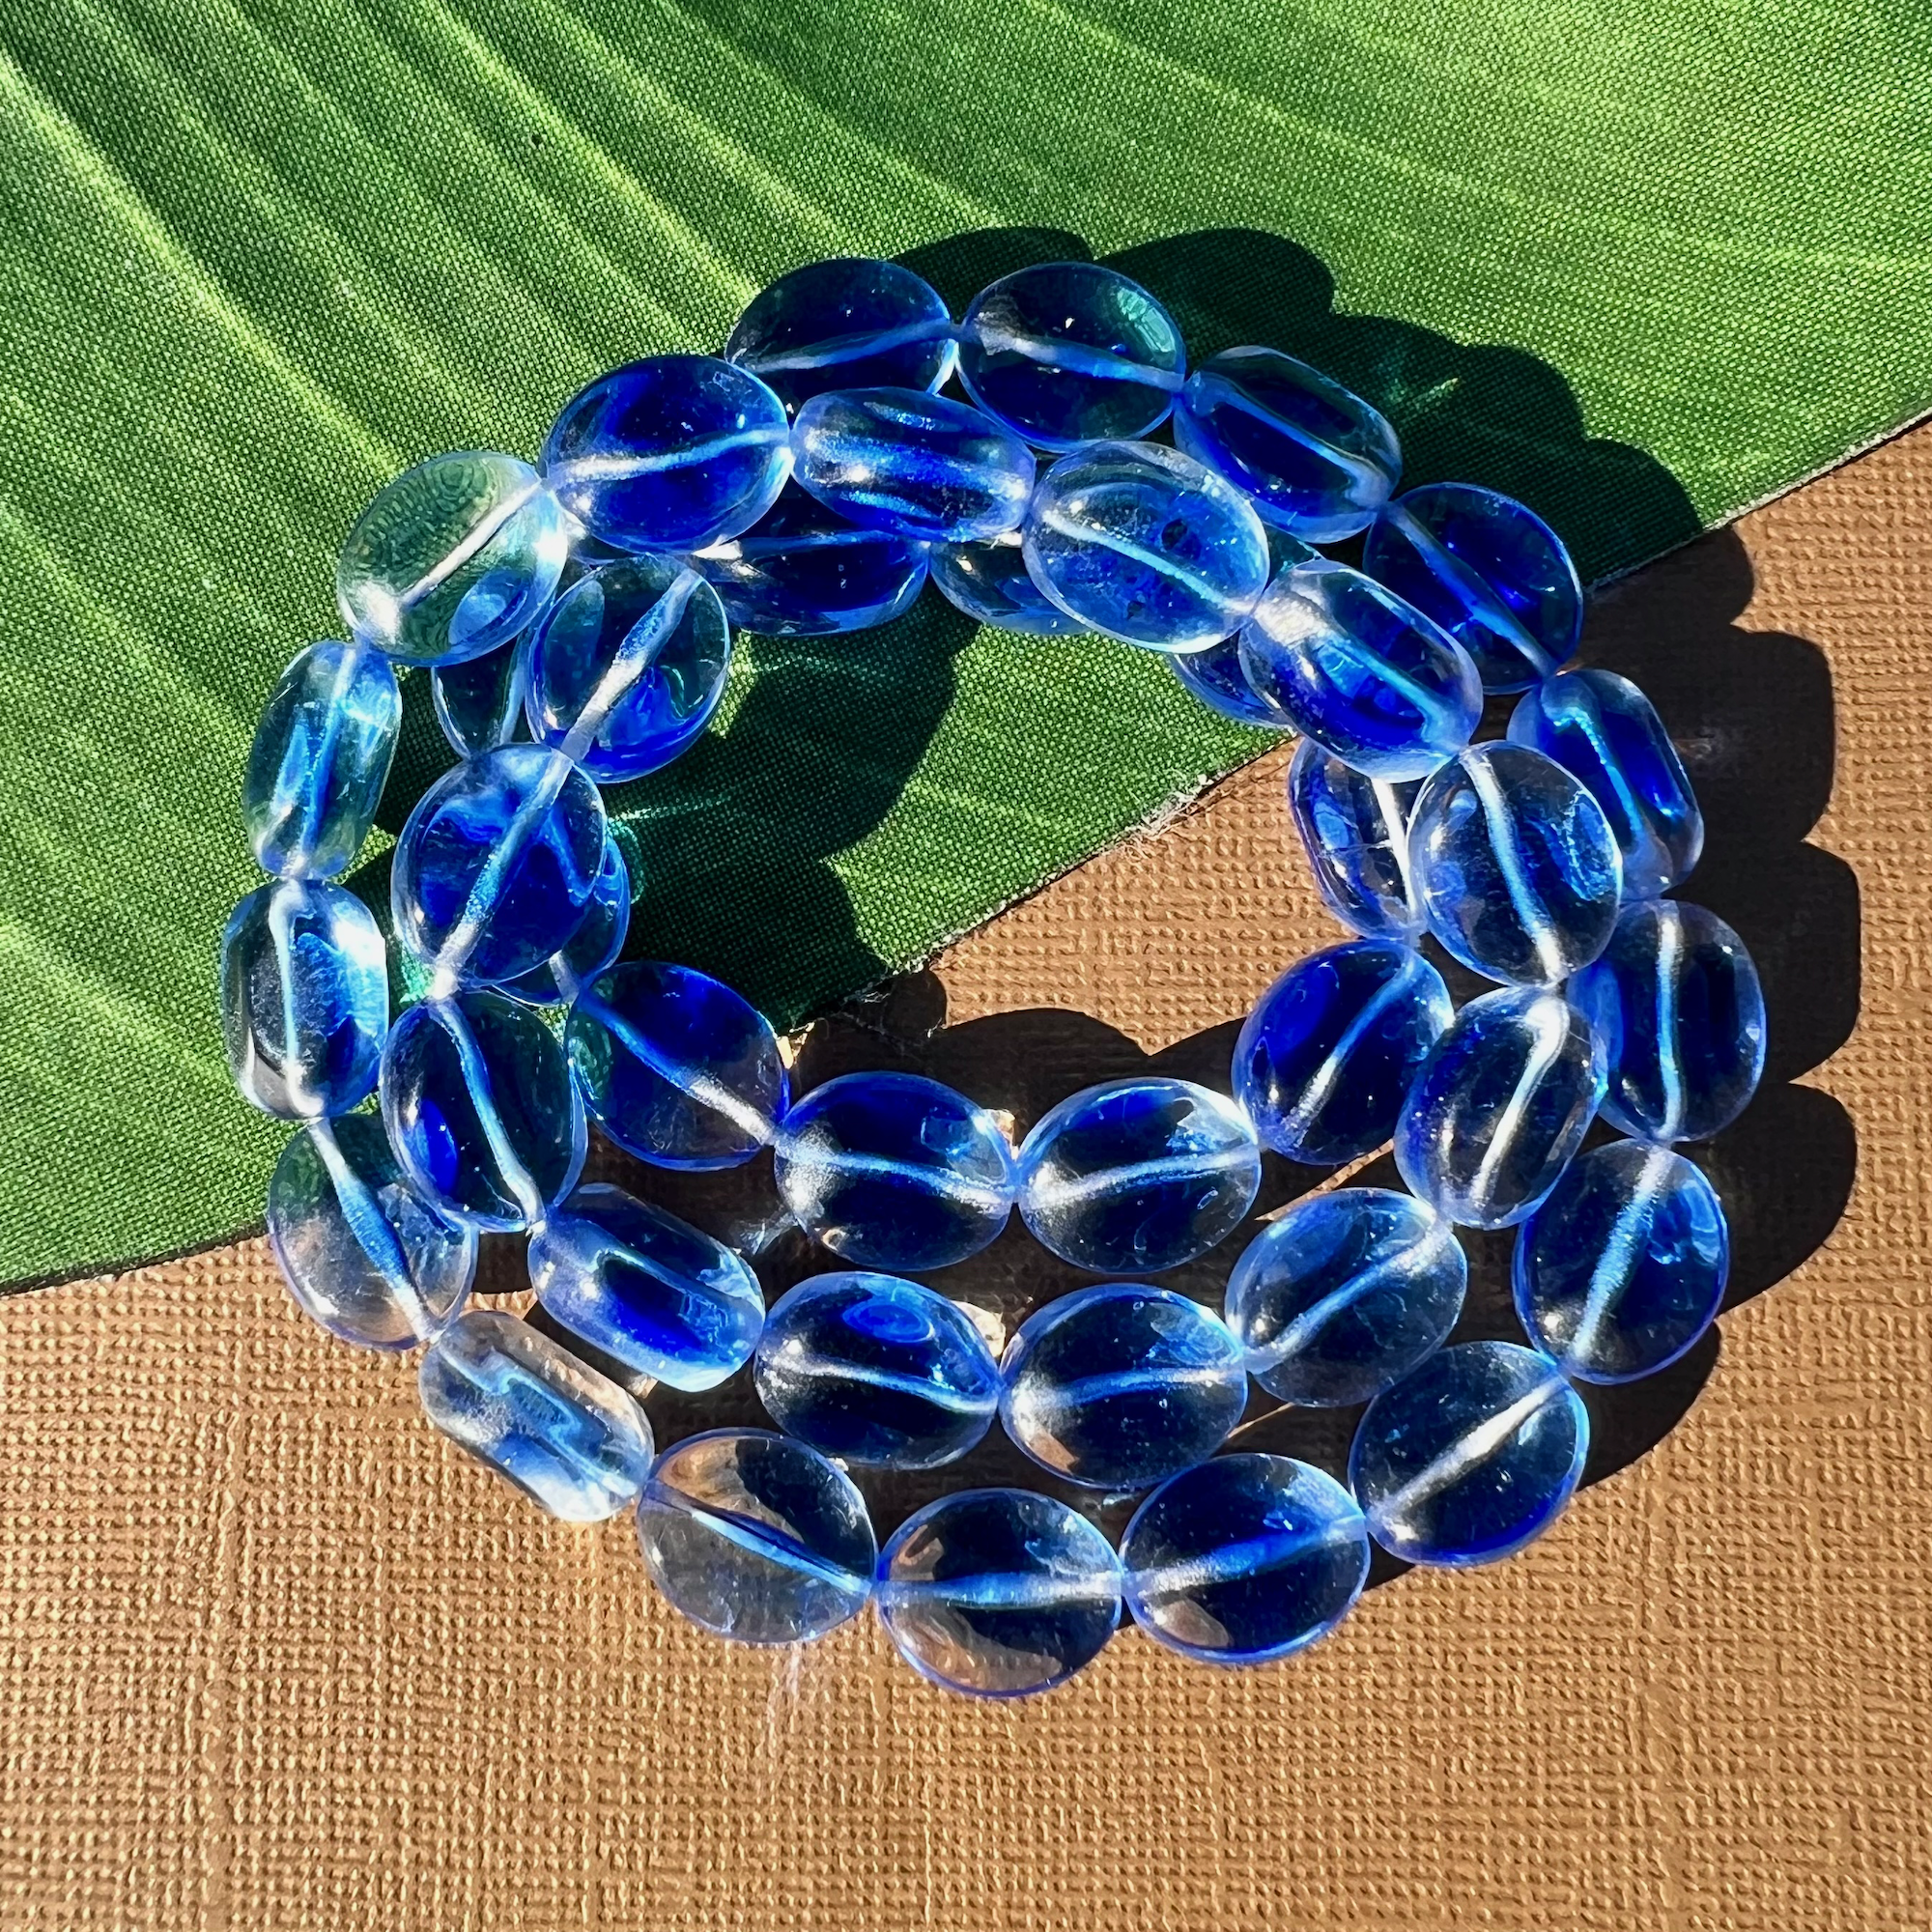 Blue and Clear Oval Beads - 40 Pieces